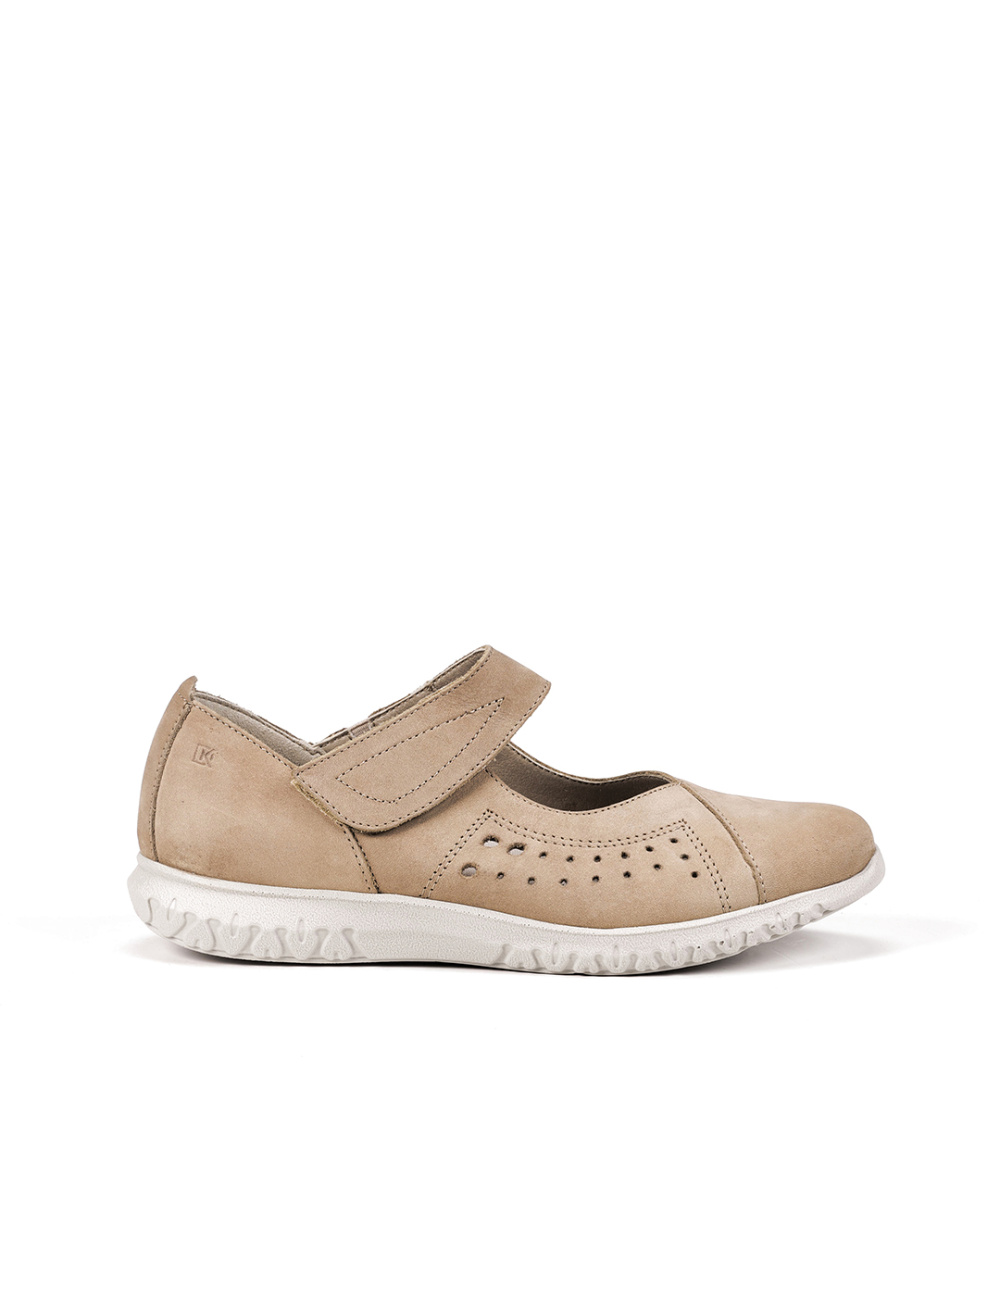 Dorking by Fluchos - Zapatos casual mujer D8227-NB